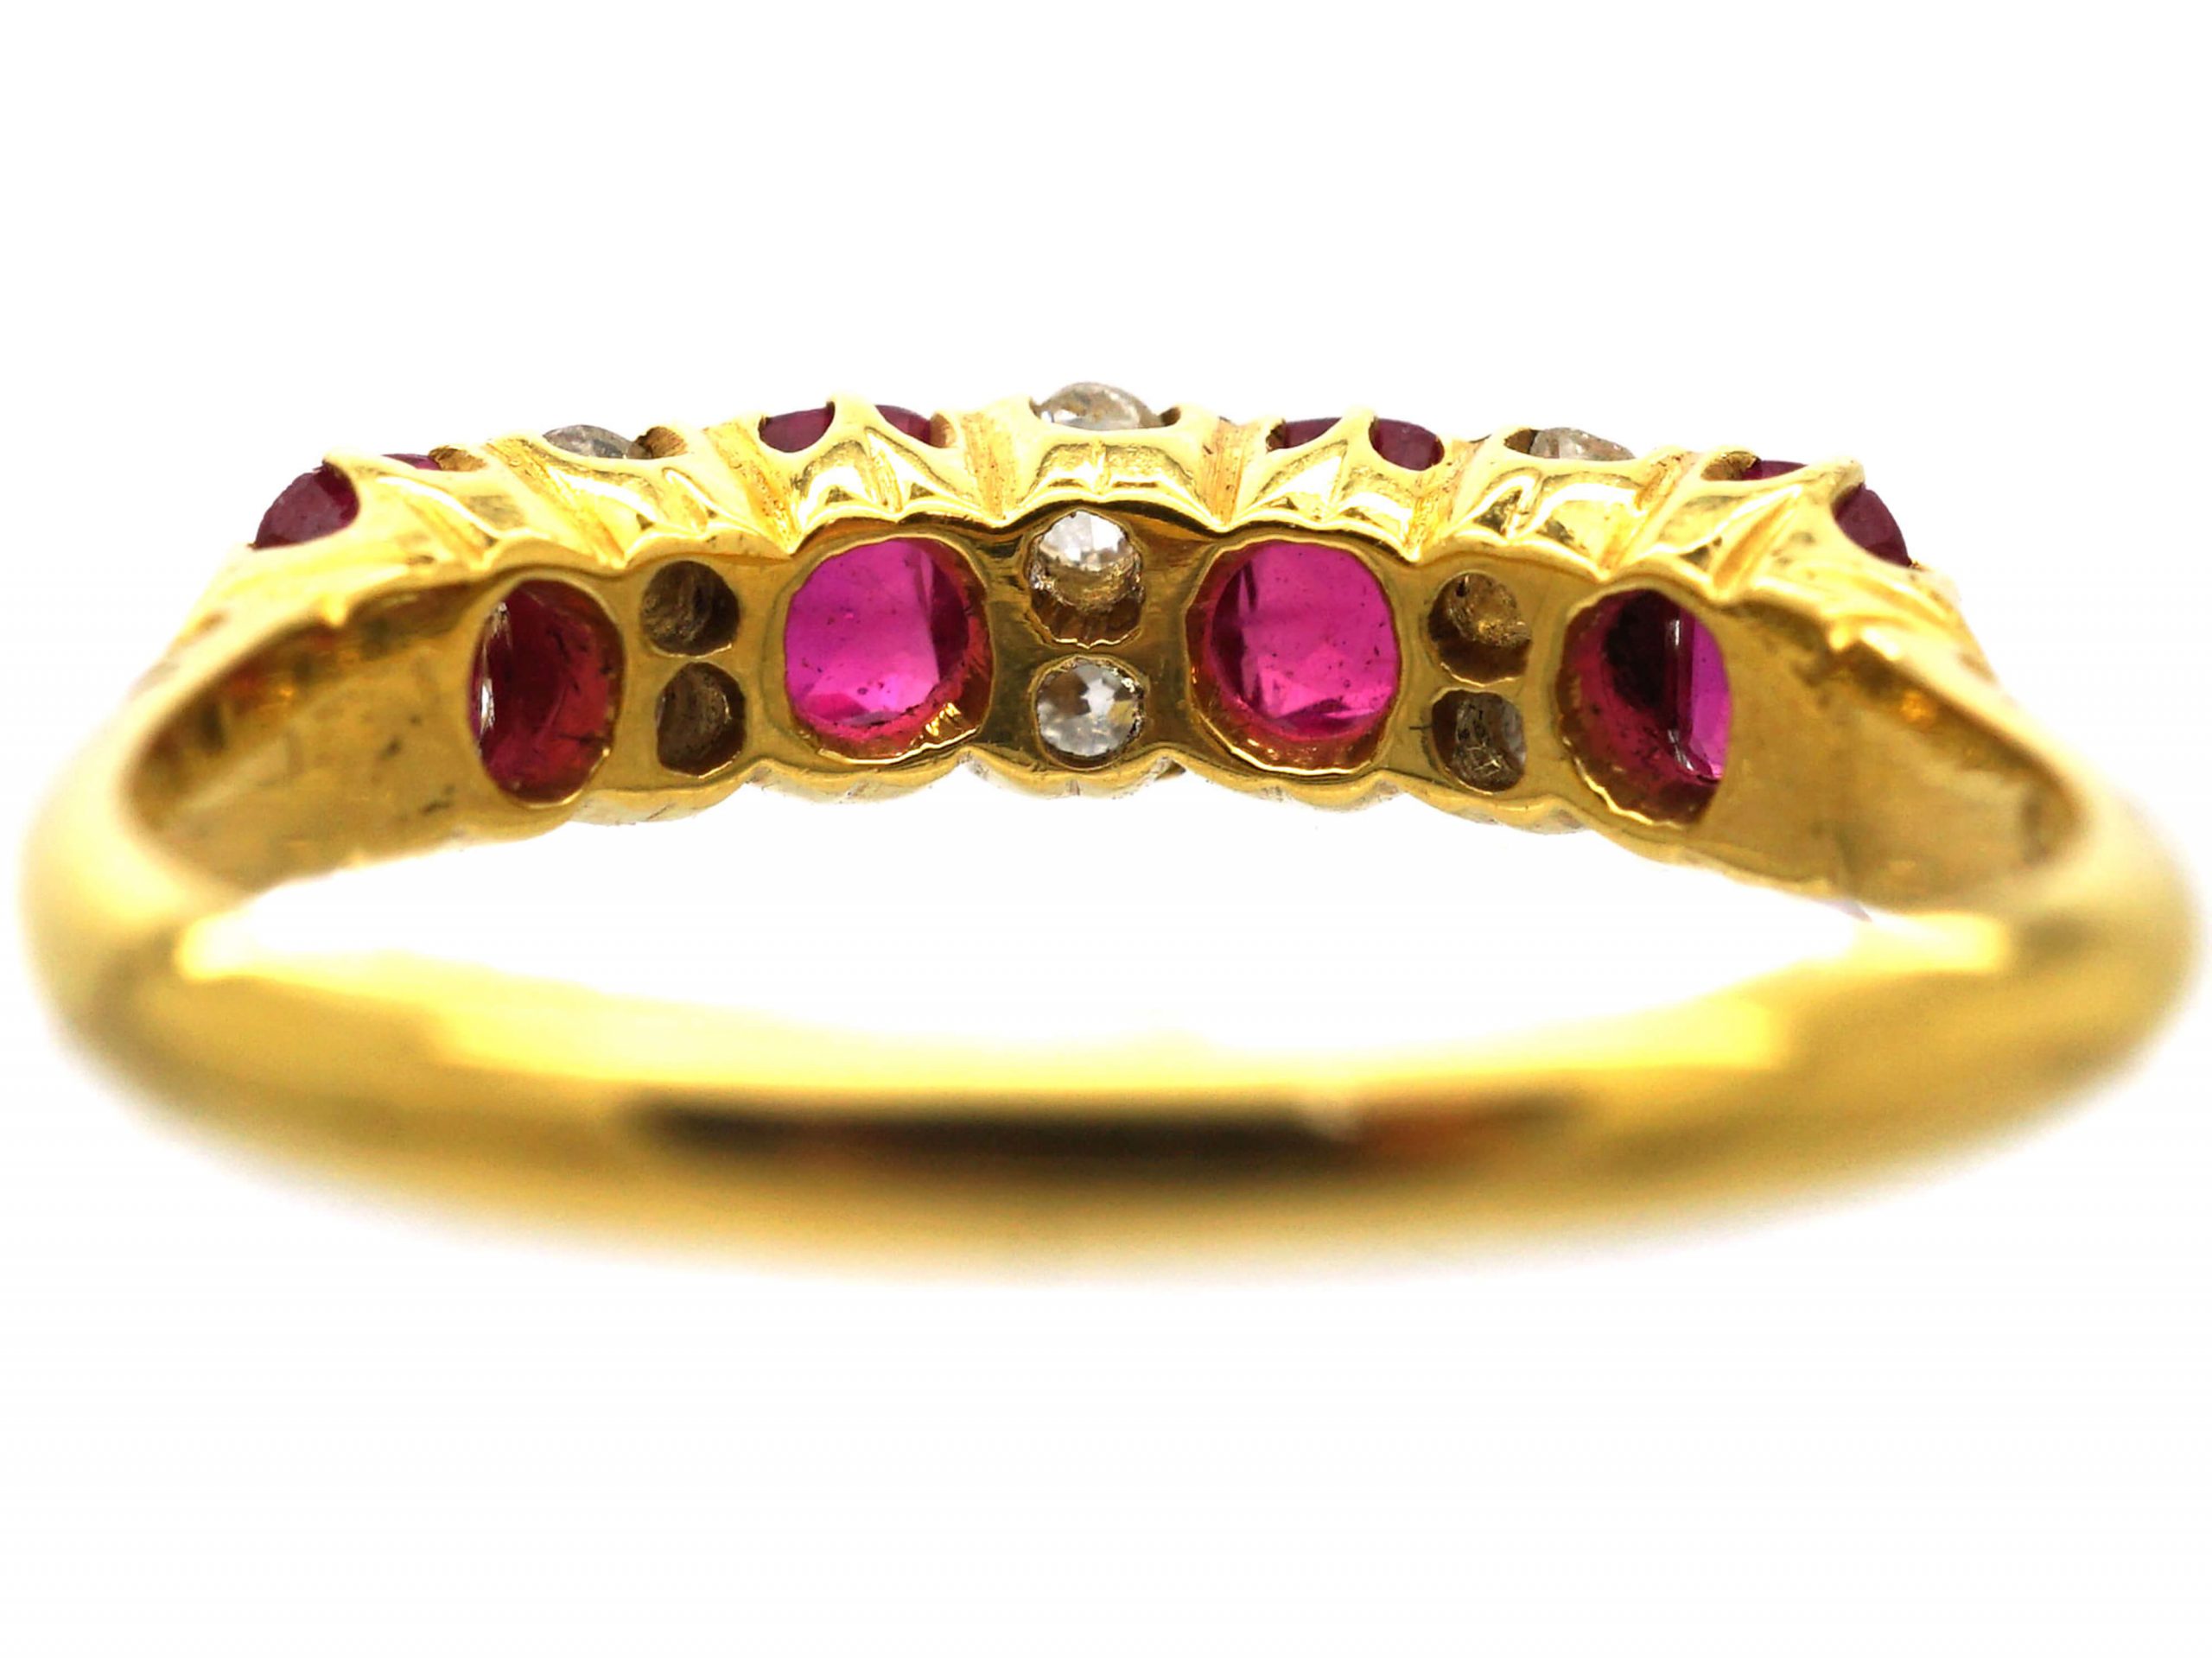 Edwardian 18ct Gold, Four Stone Ruby & Diamond Ring (450S) | The ...